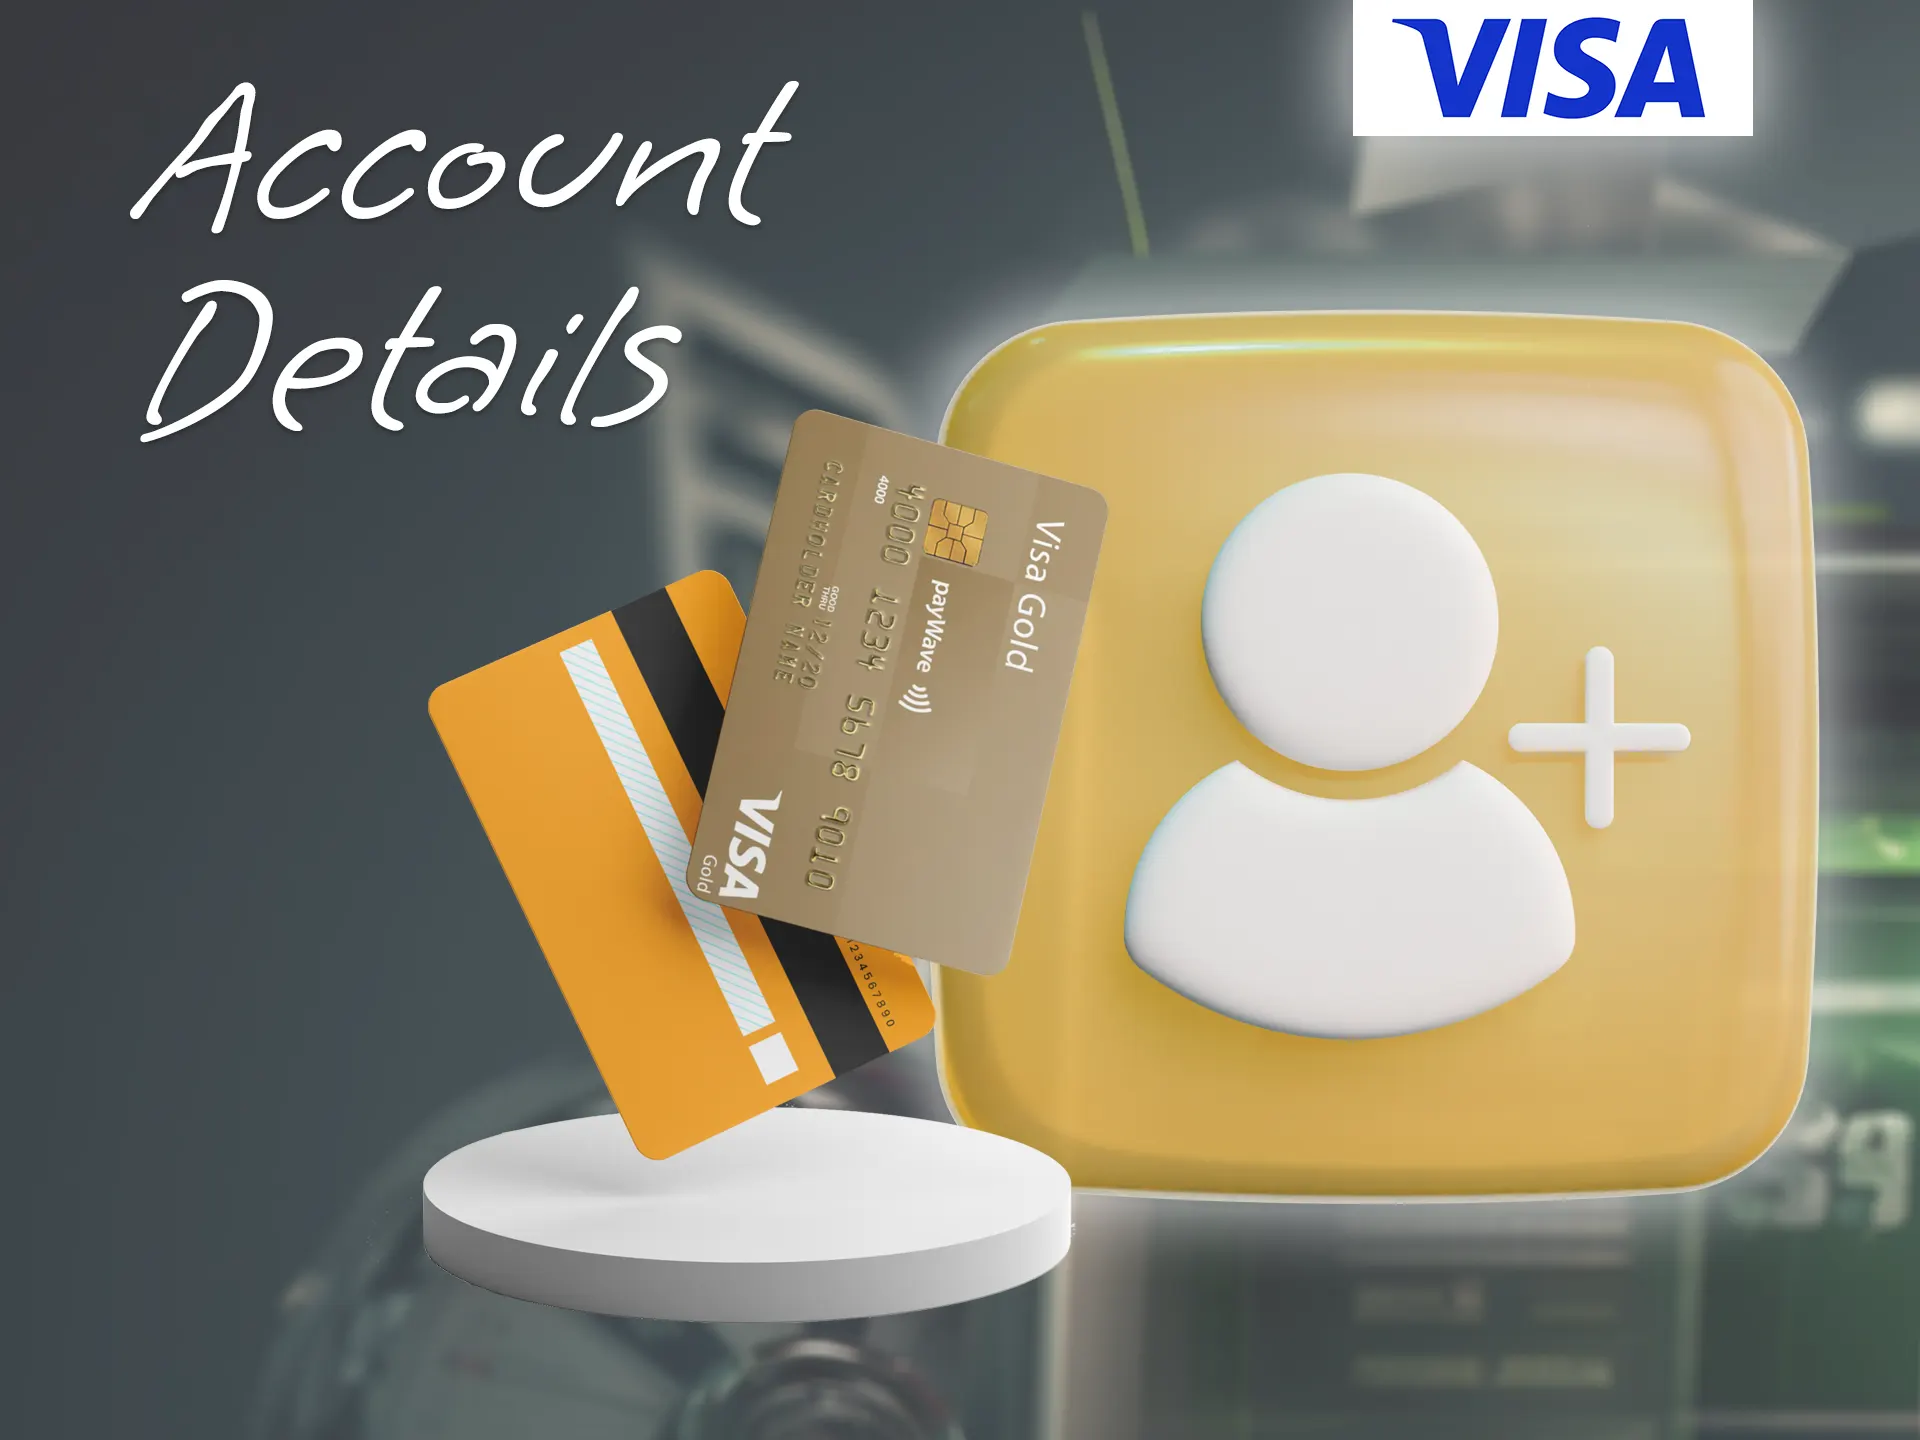 Become a user of the Visa payment system.